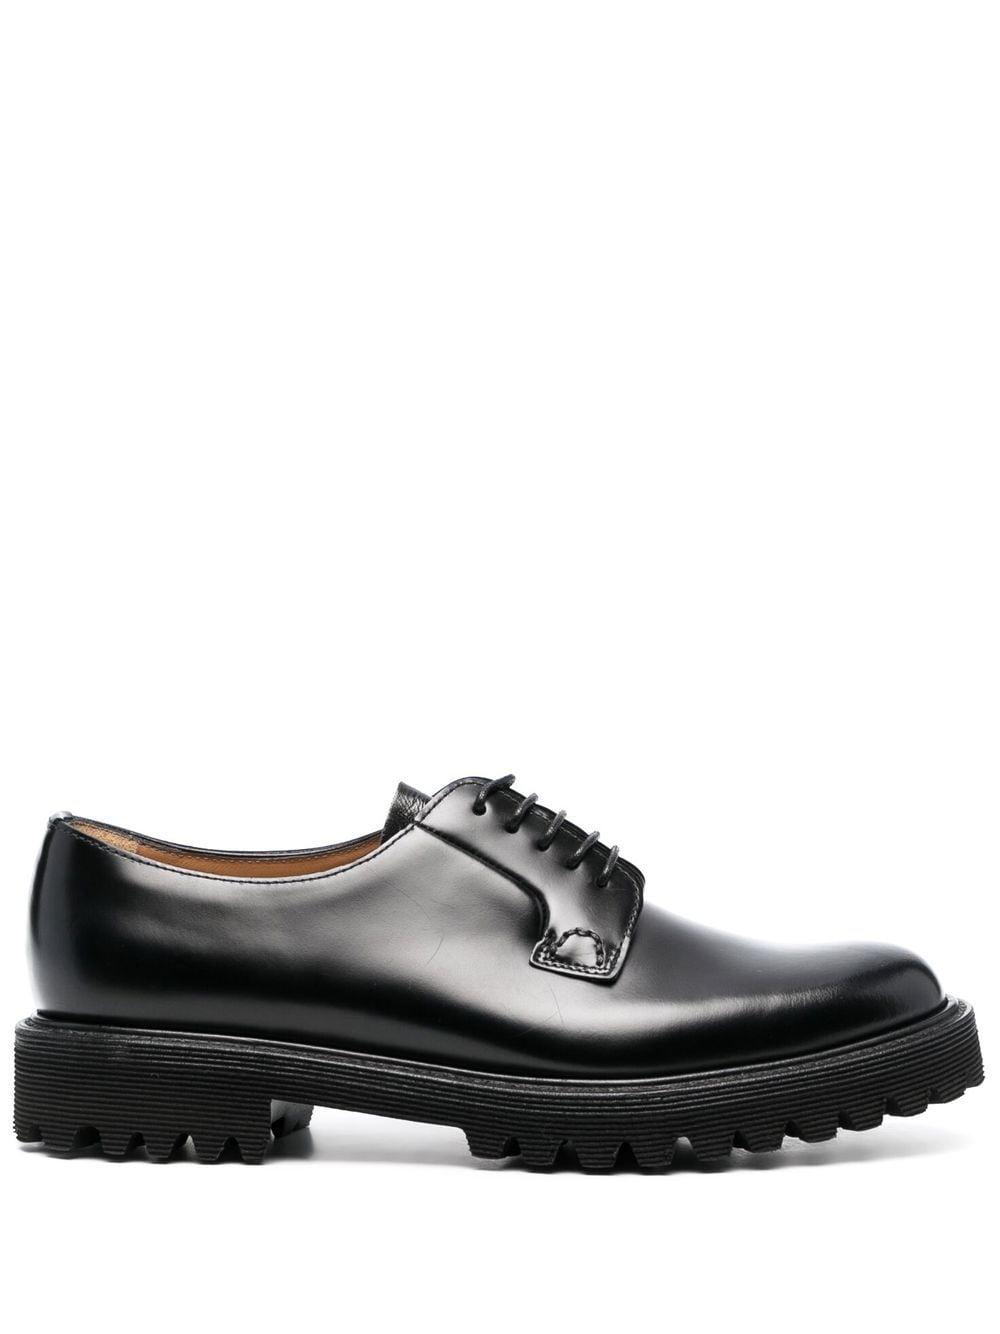 Church's Shannon Lace-up Brogues in Black | Lyst